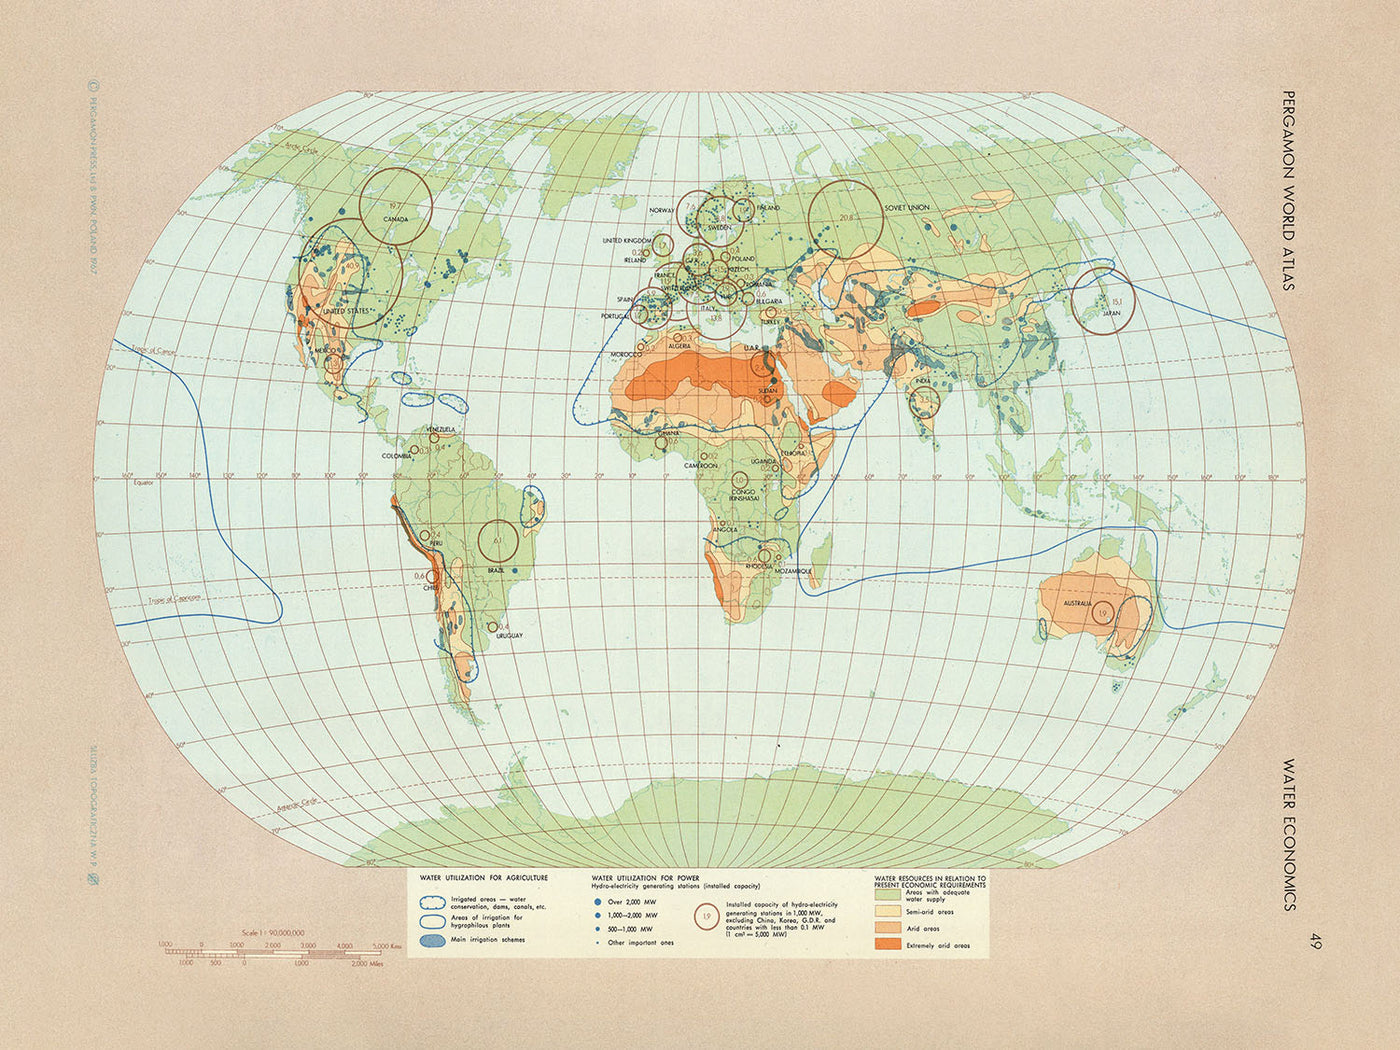 Old Infographic Map of World Water Economics, 1967: Water Utilization, Agriculture, Hydroelectric Power